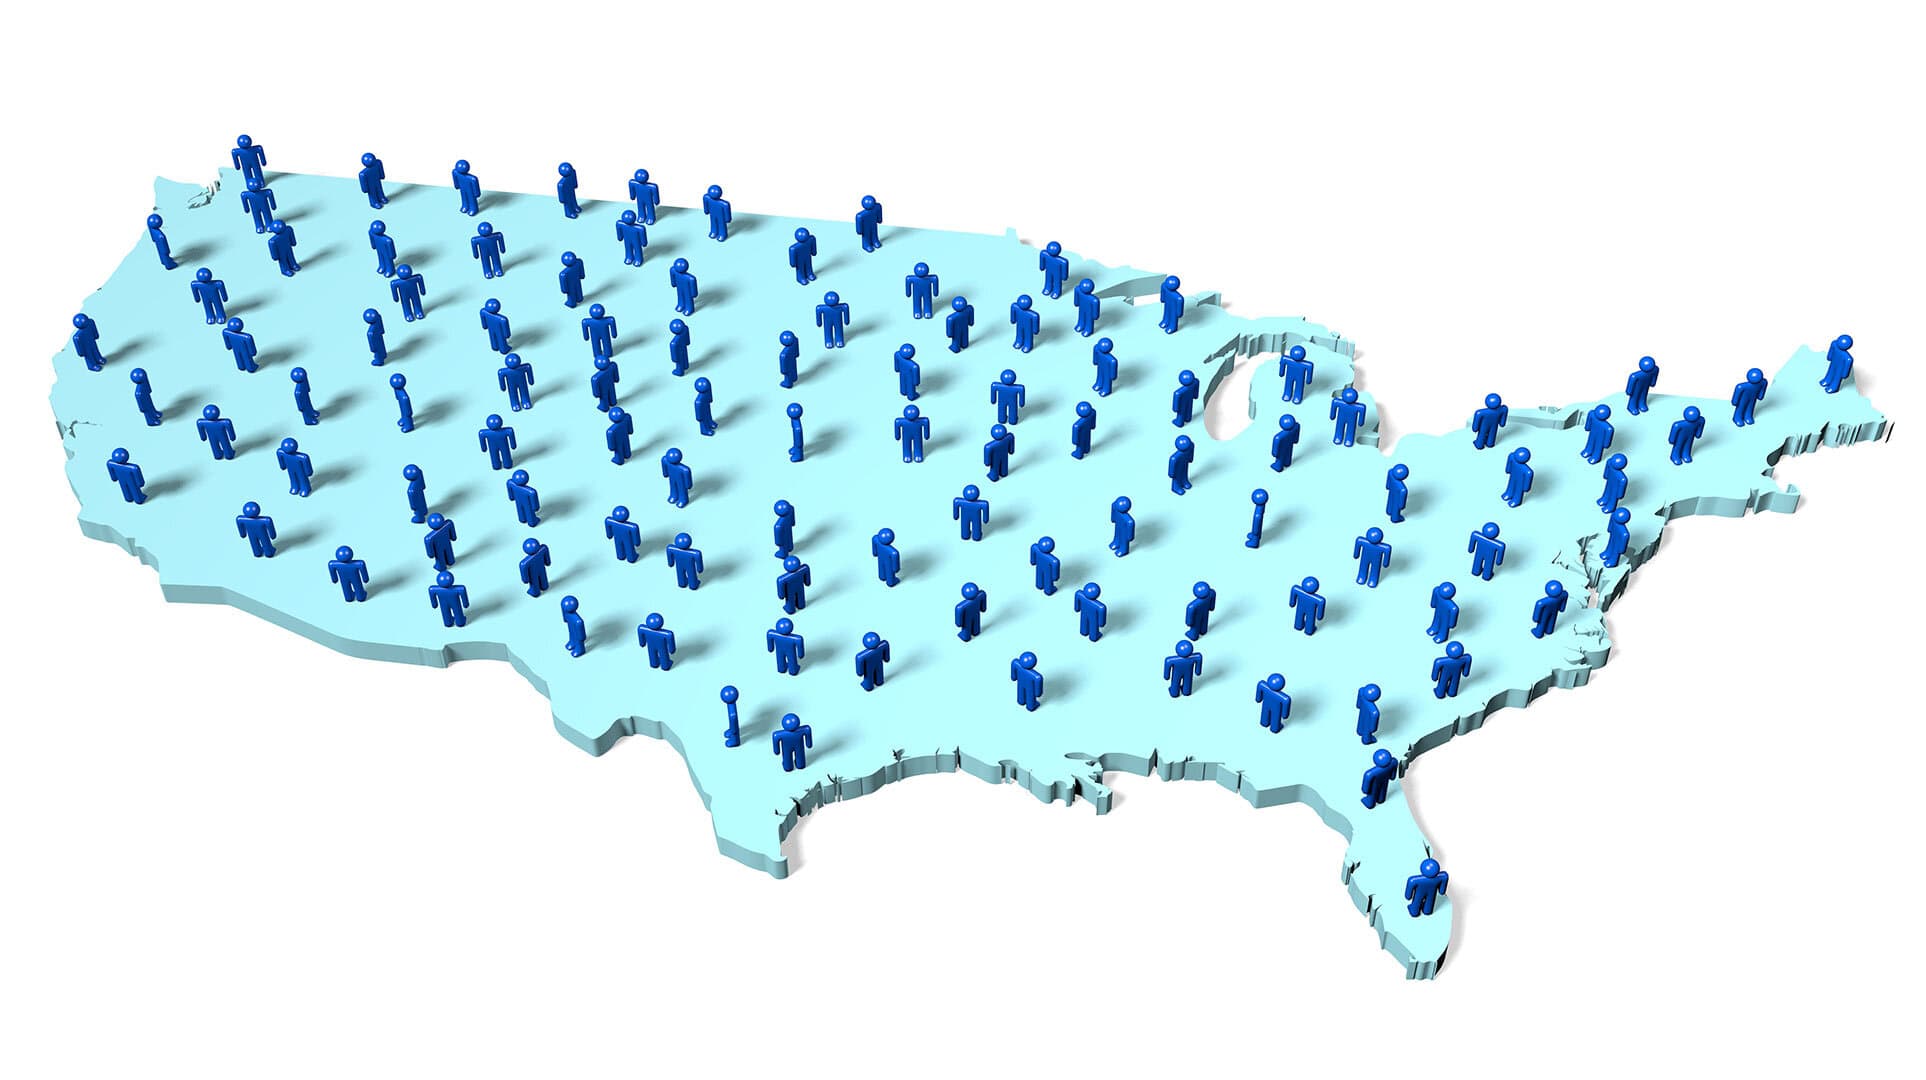 Light blue outline of USA with blue people inside